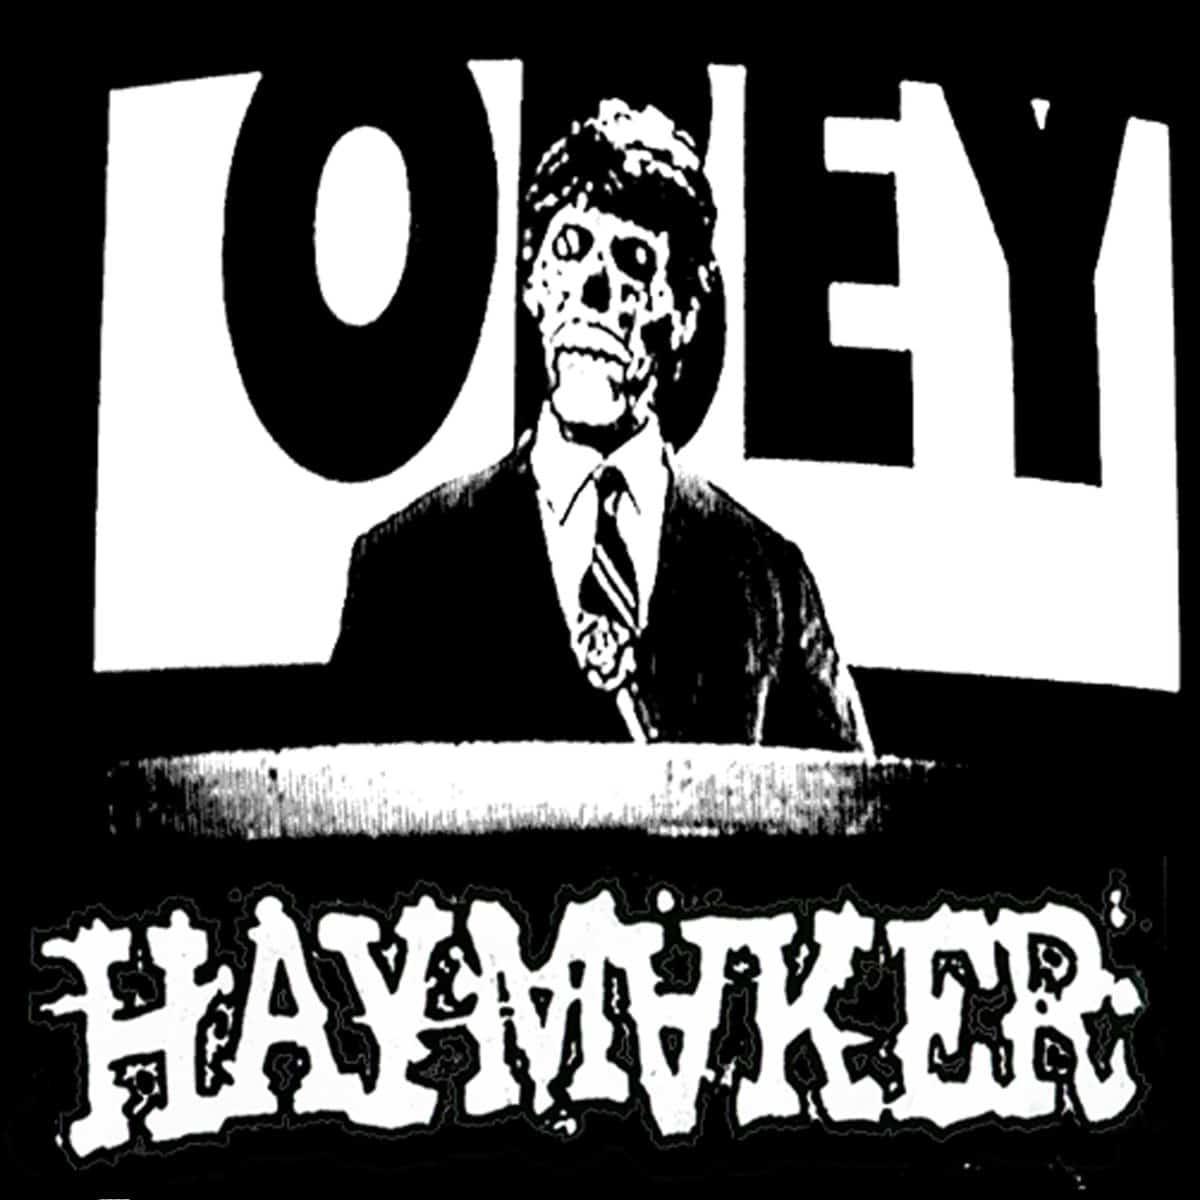 Haymaker - Let Them Rot 7"